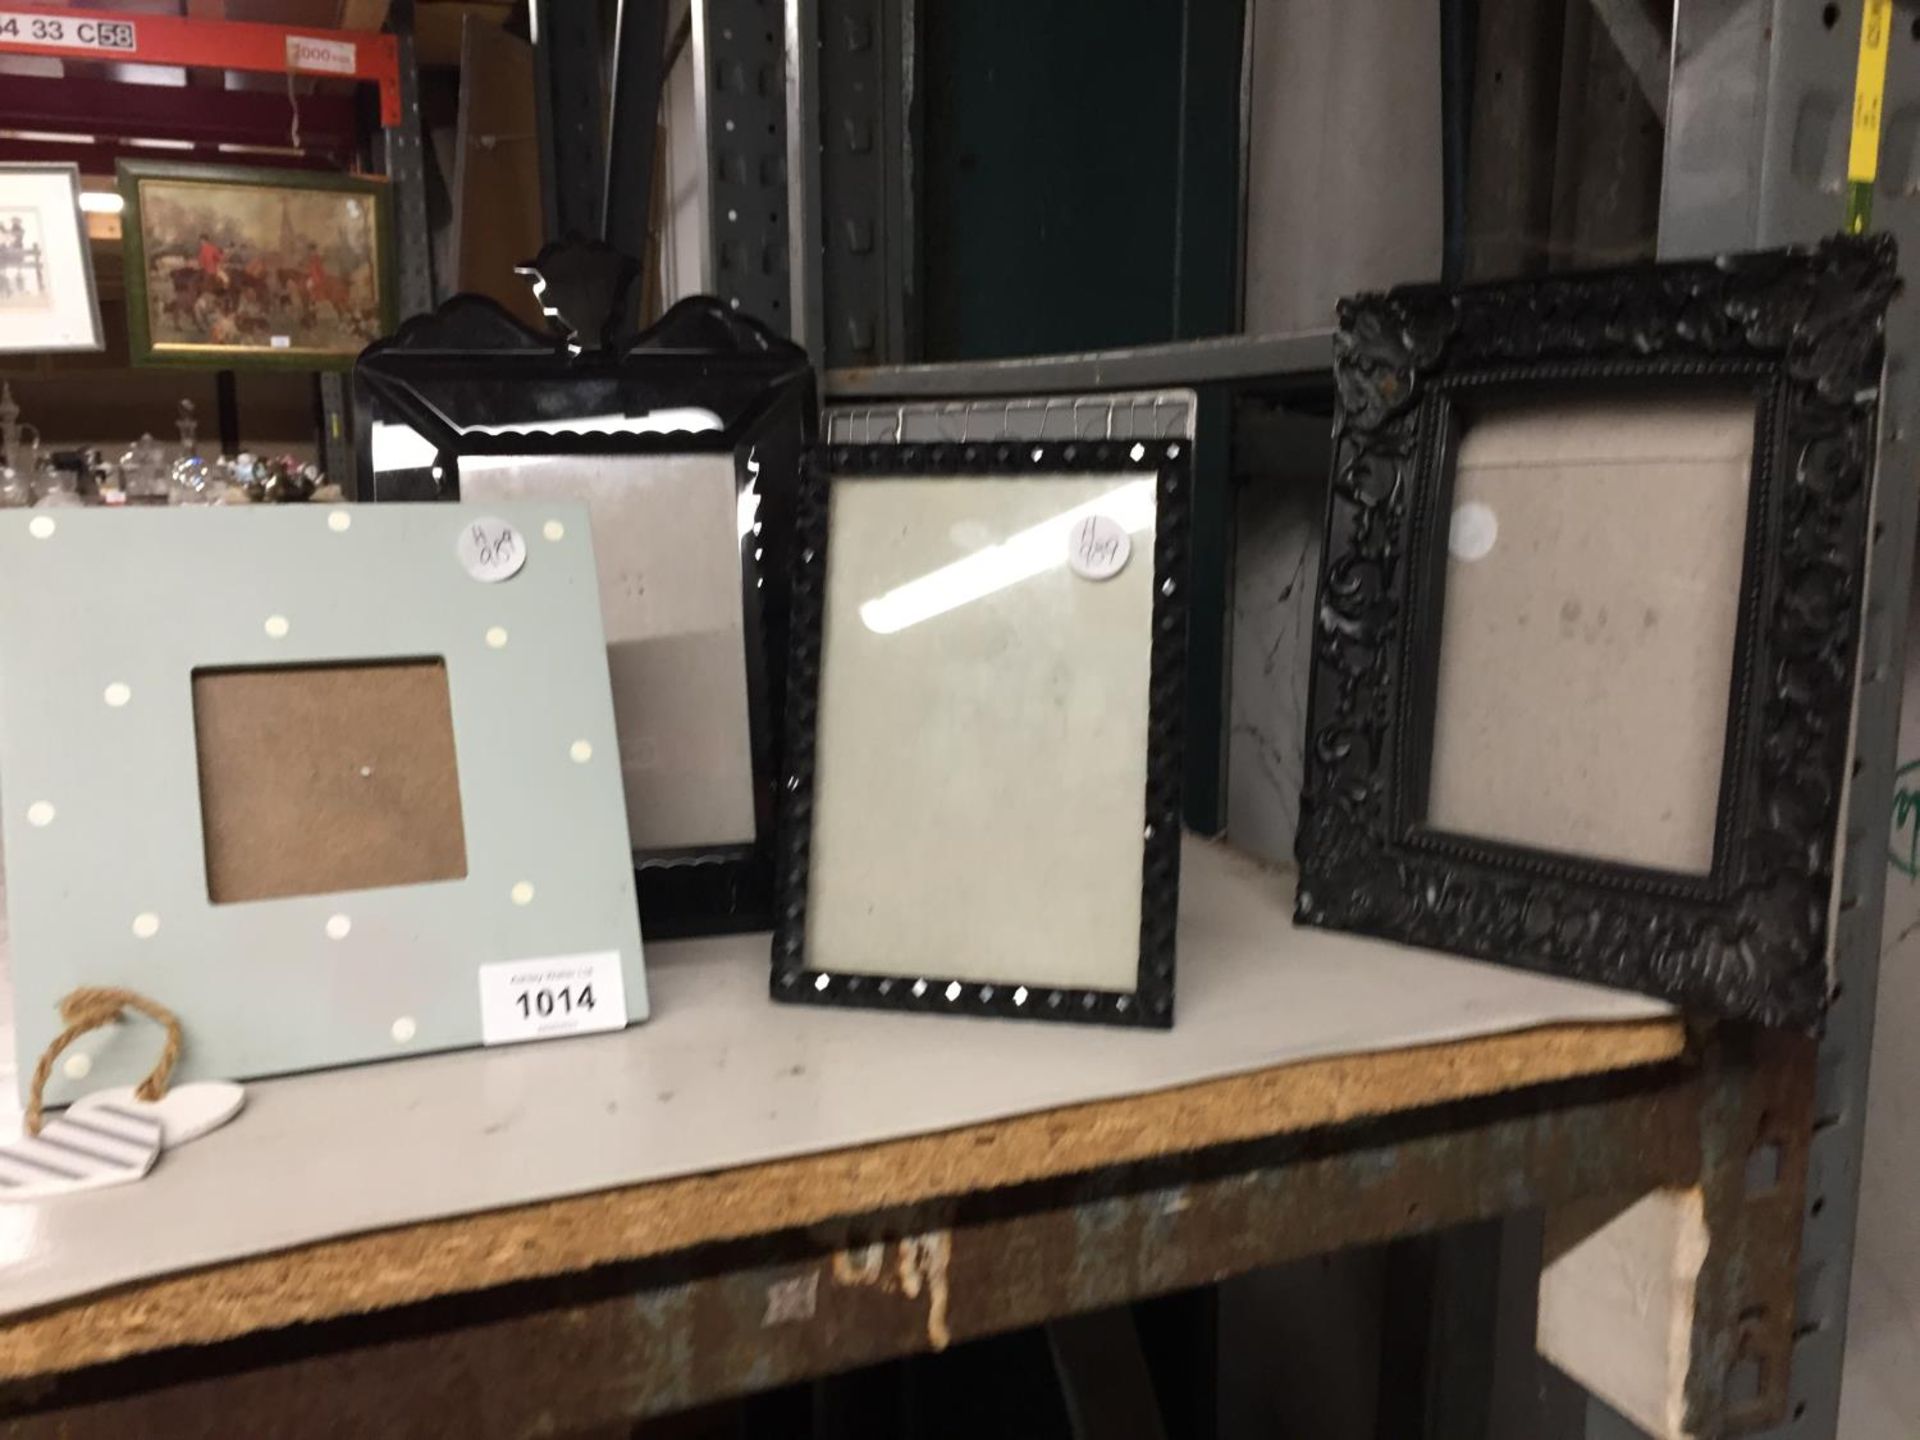 A QUANTITY OF PHOTOGRAPH FRAMES - 6 IN TOTAL